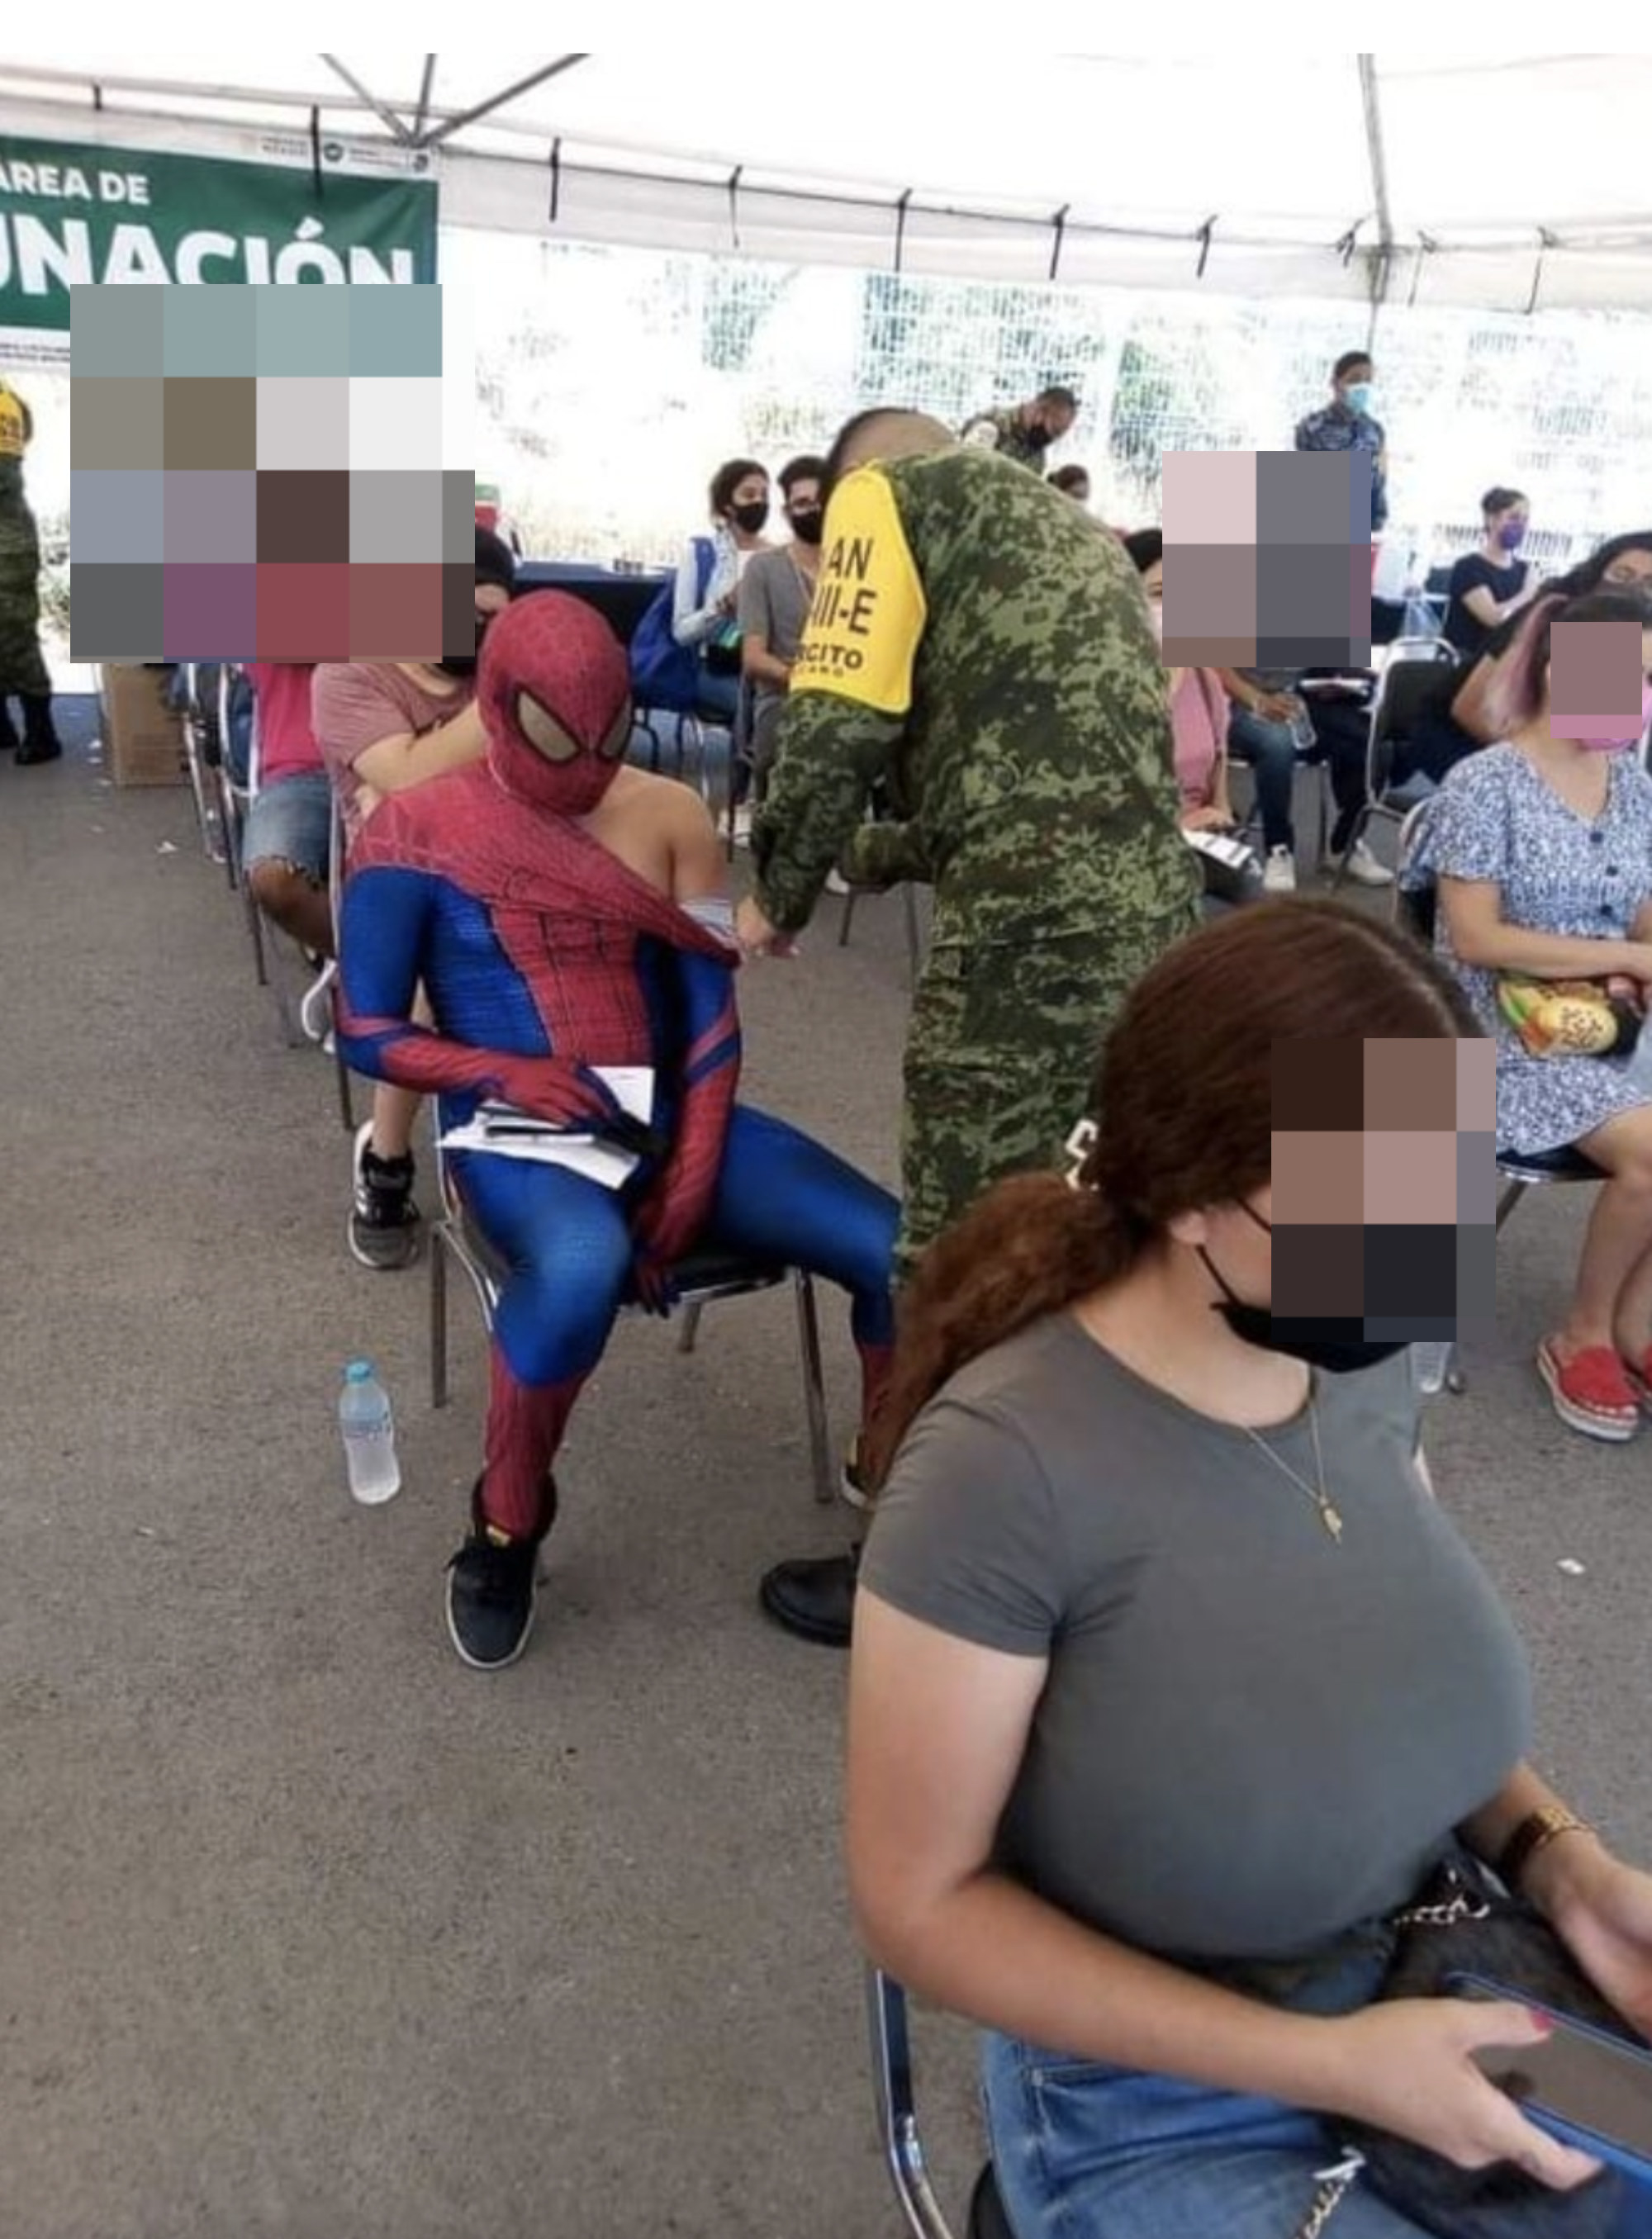 A man dressed as Spider-Man getting vaccinated.